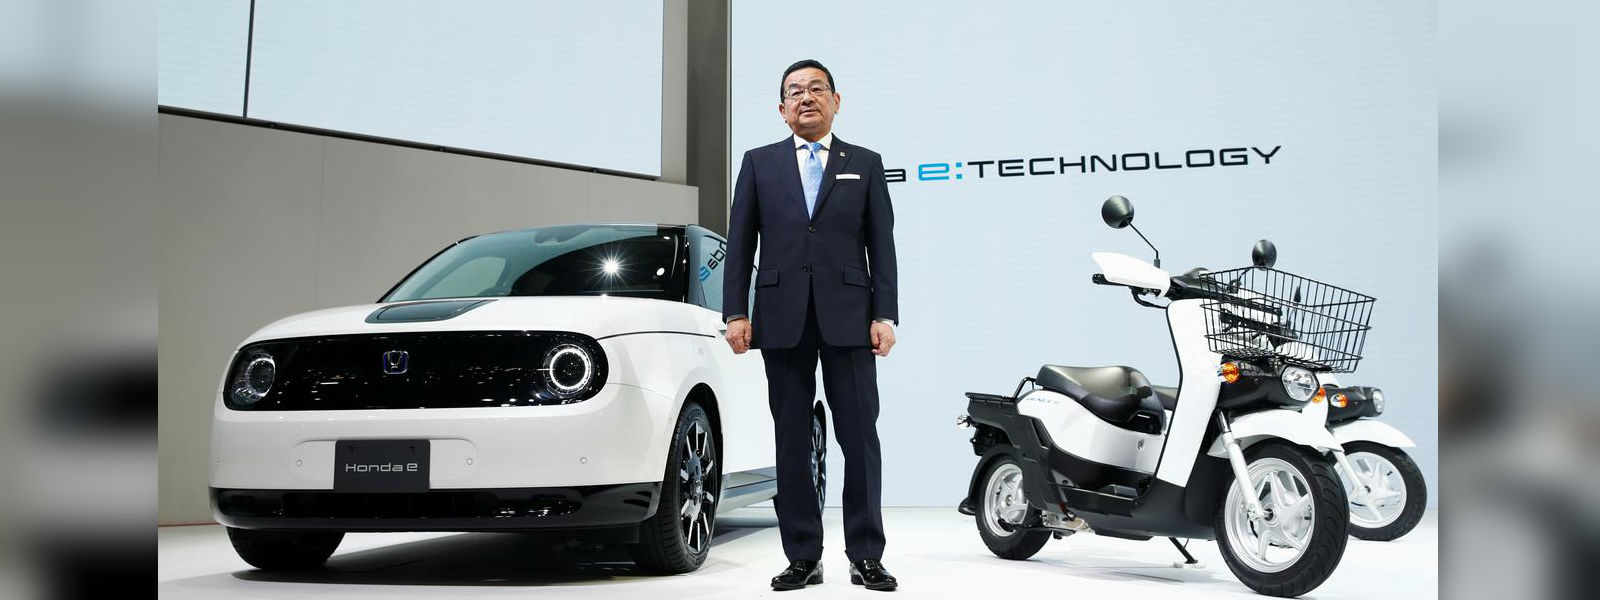 To go big on EVs, Japanese car makers think small